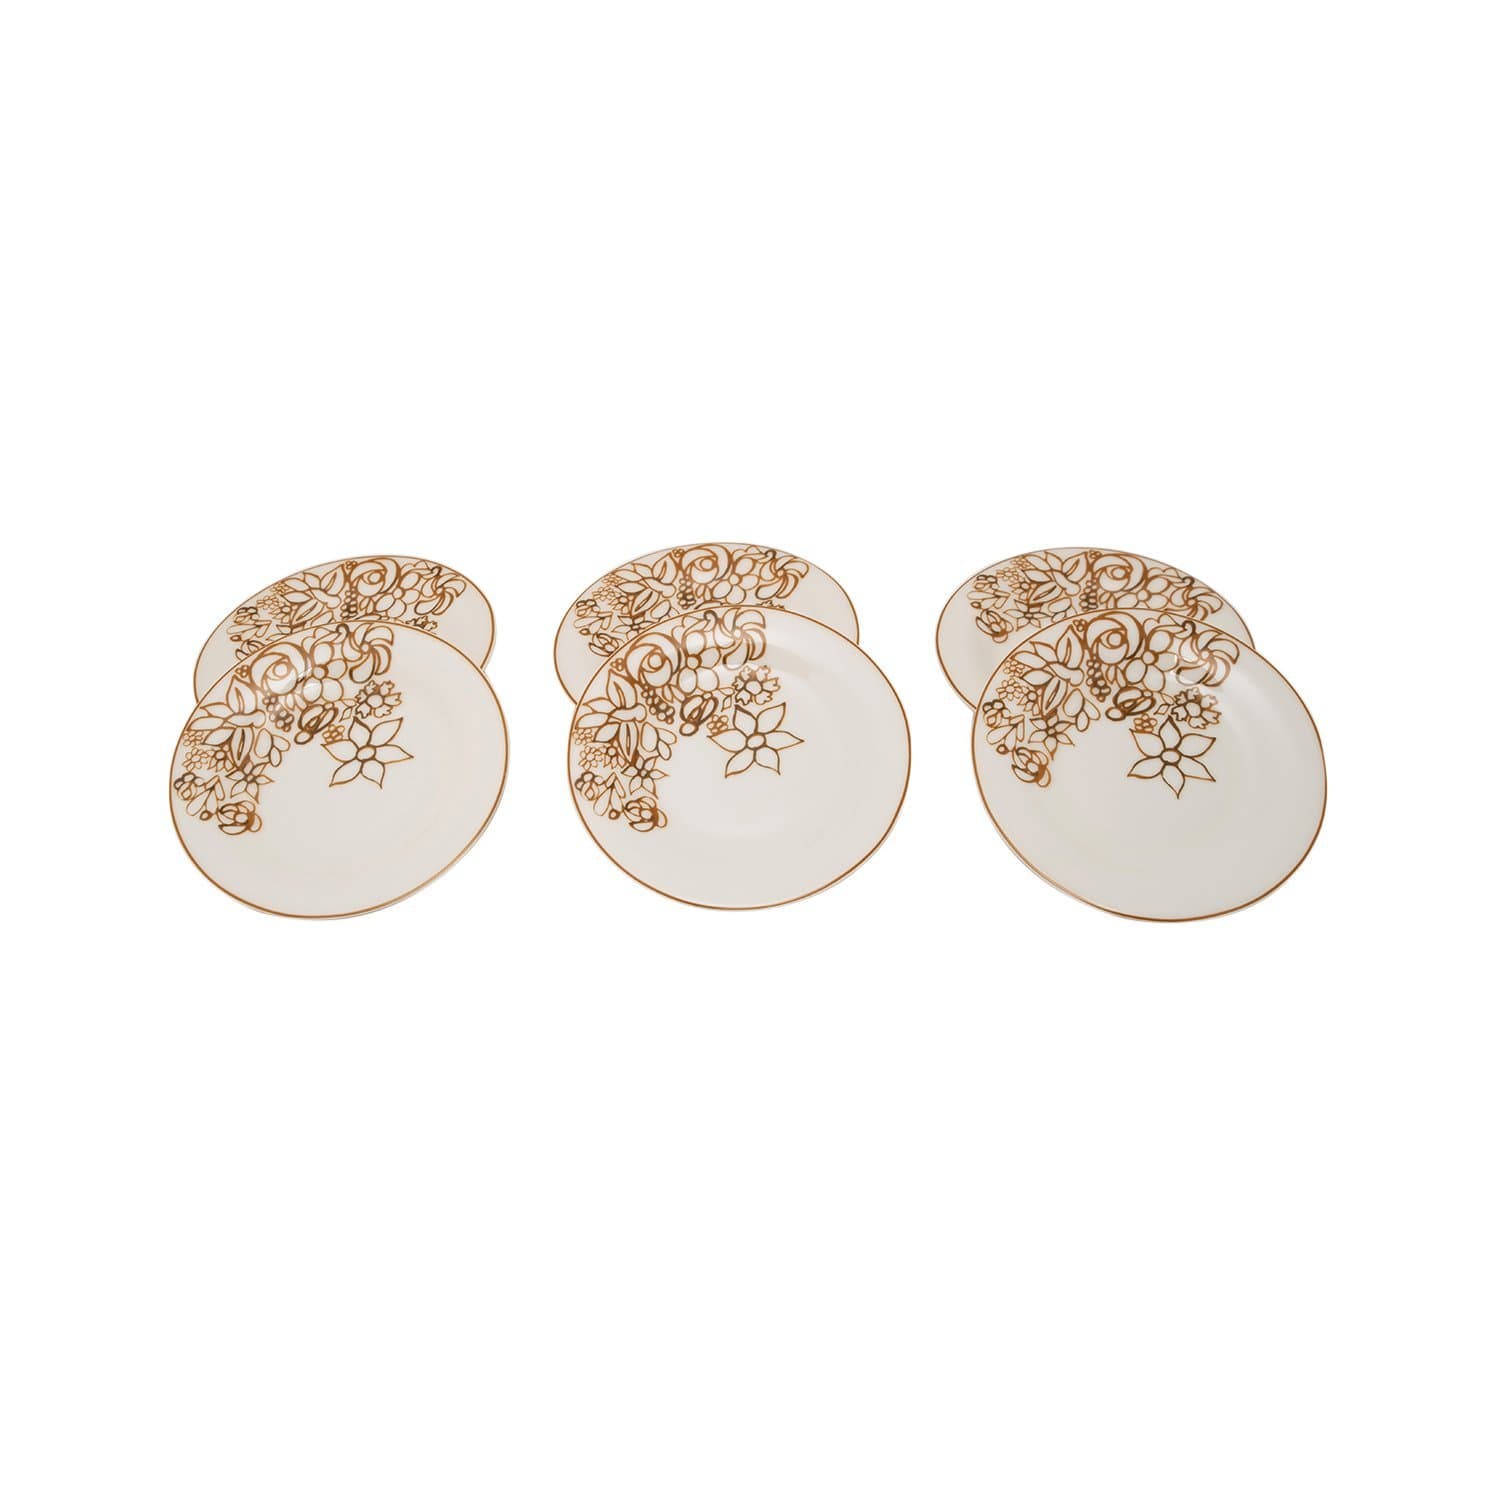 L'atelier FB Embroidery Coupe Shape Round Cookies Plate Set - 16 cm, 6 Pieces - TC 4715 013 - Jashanmal Home